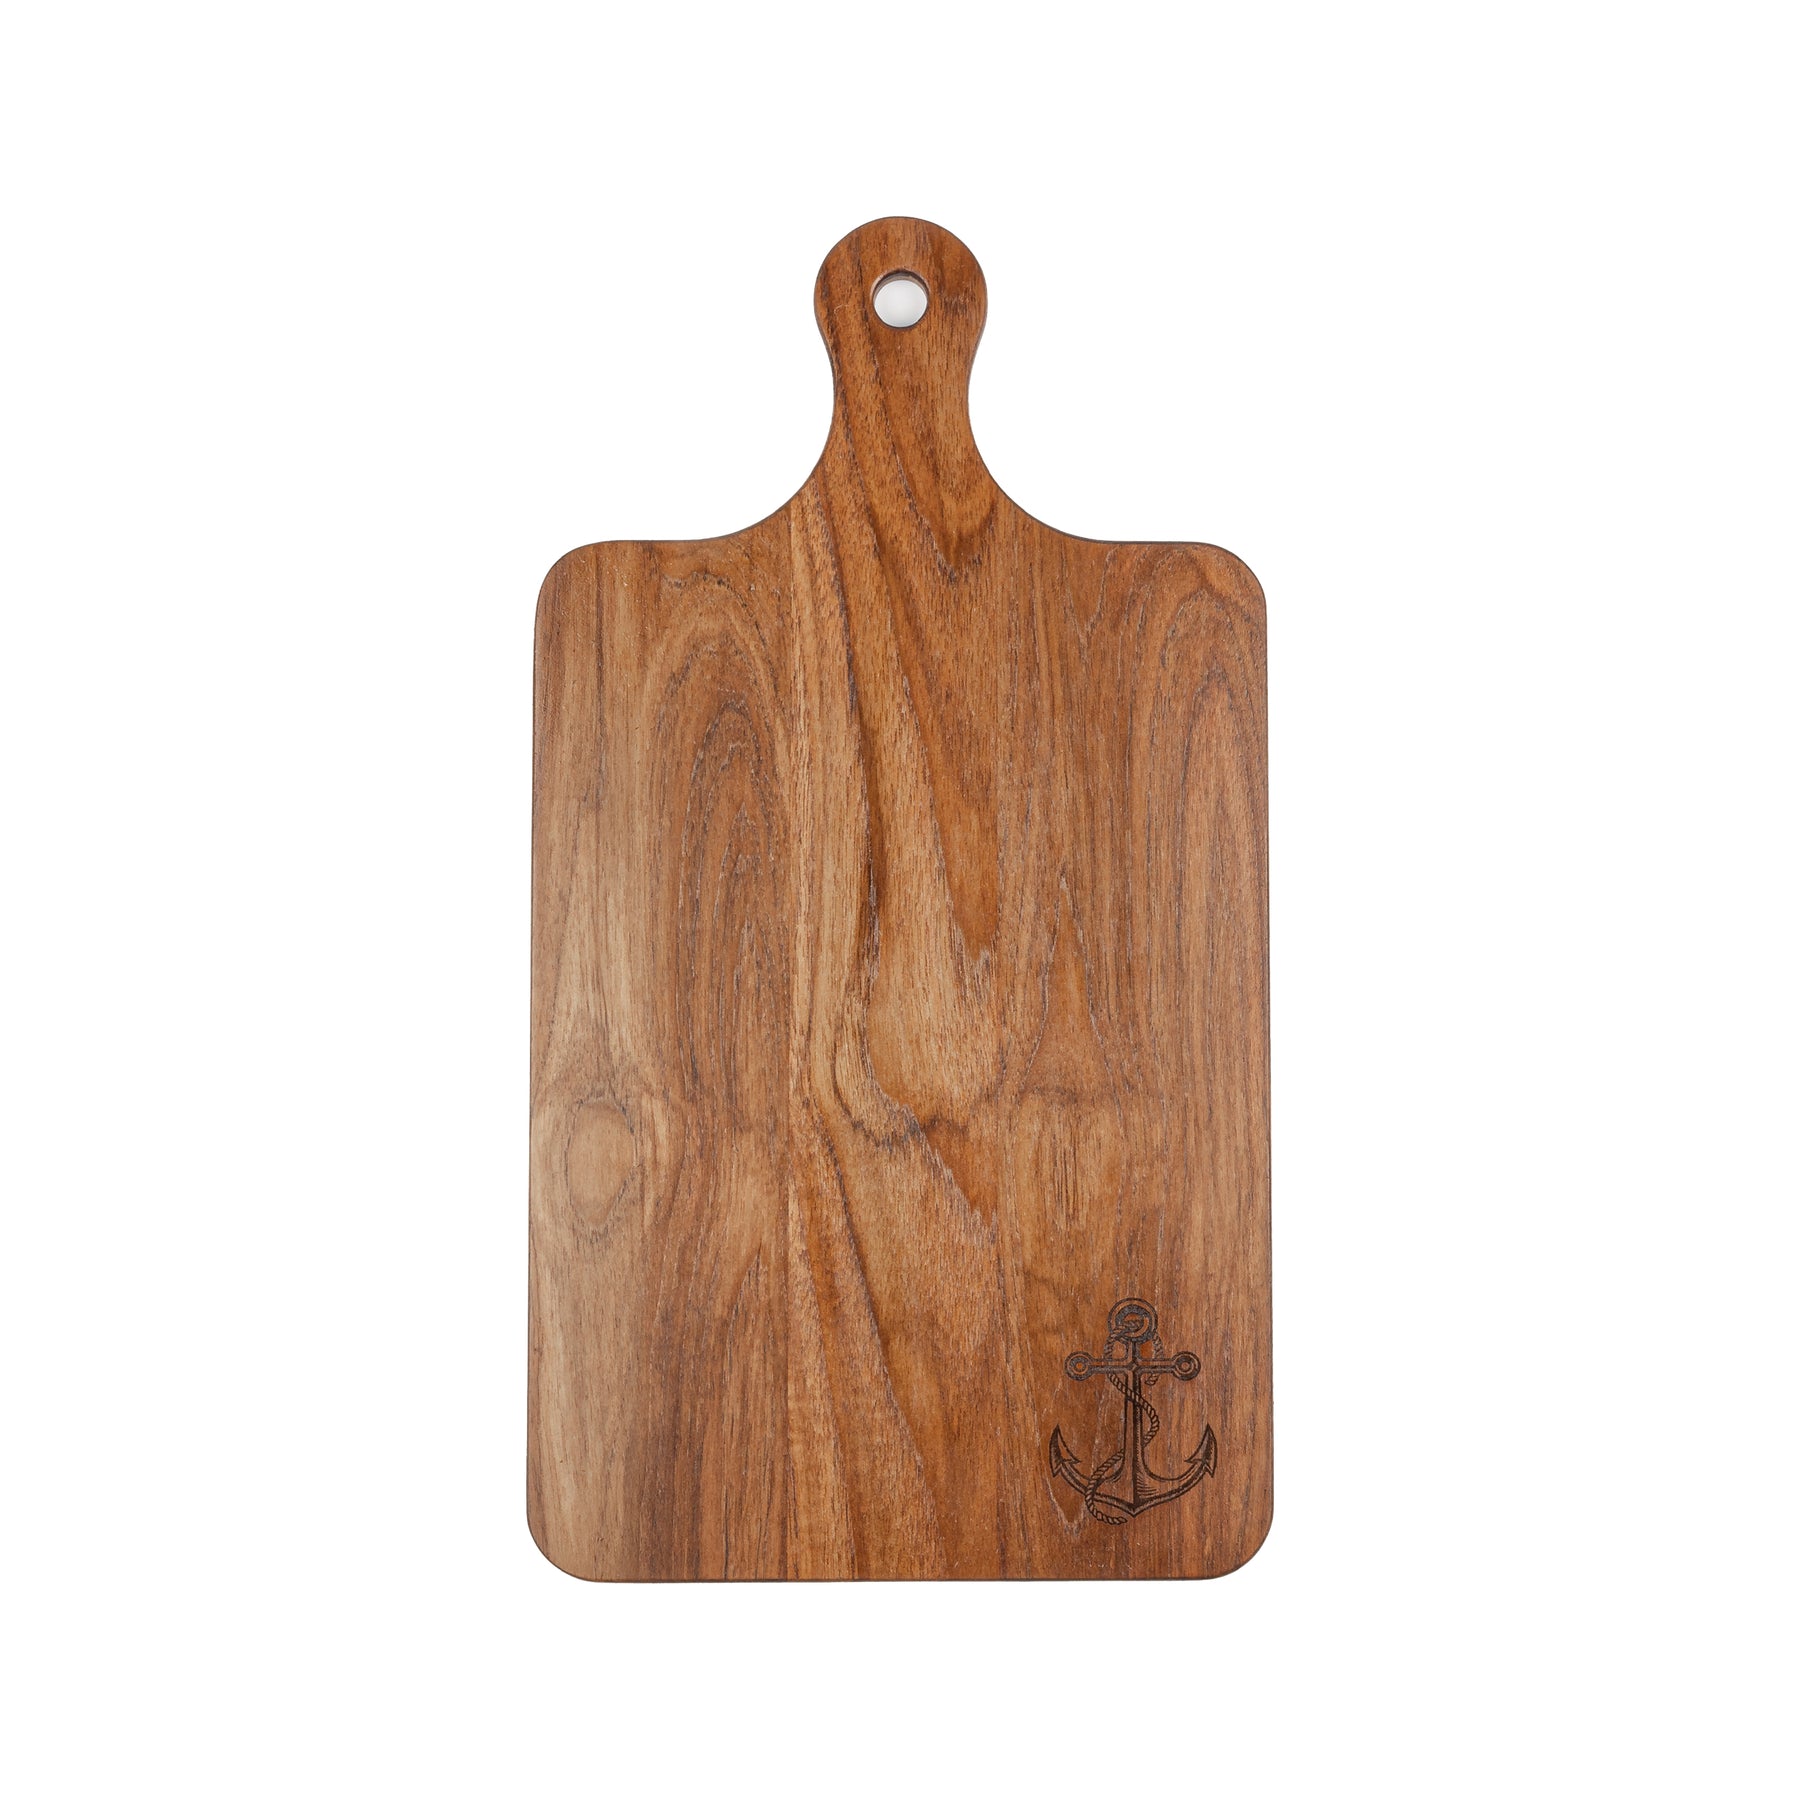 Chef's Collection Teak Large Charcuterie Board - Anchor - 10" x 14" - 60764ANCC